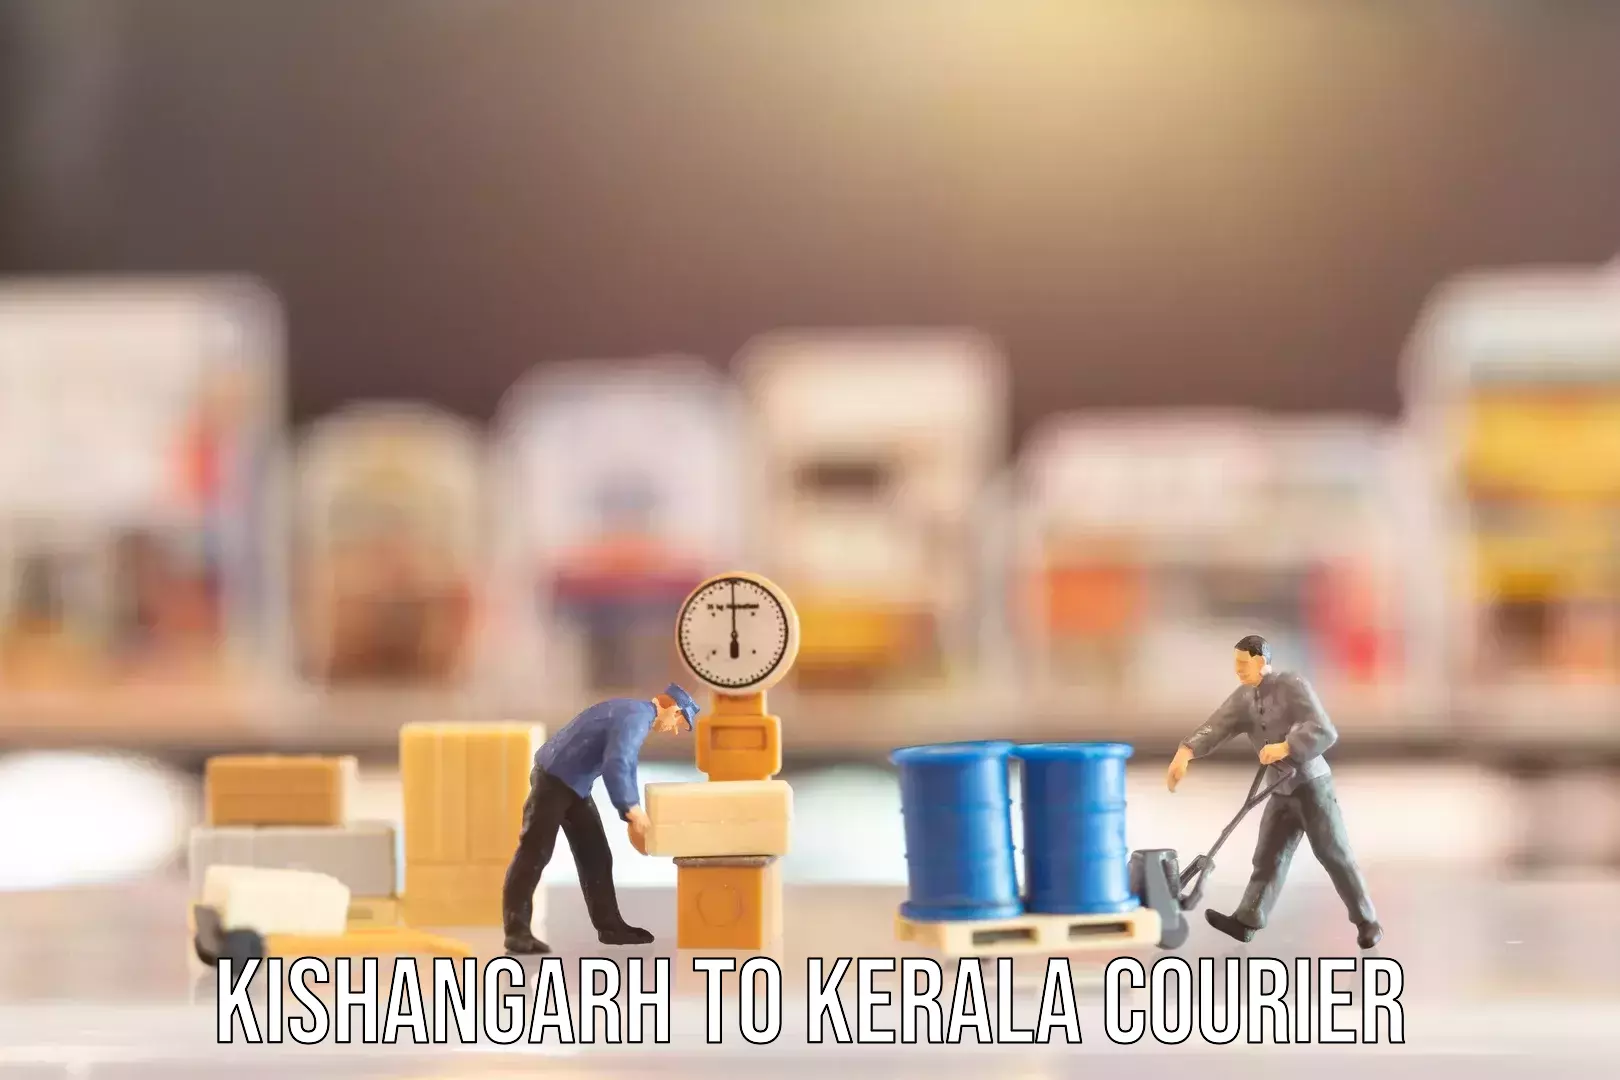 Baggage transport cost Kishangarh to Cochin University of Science and Technology